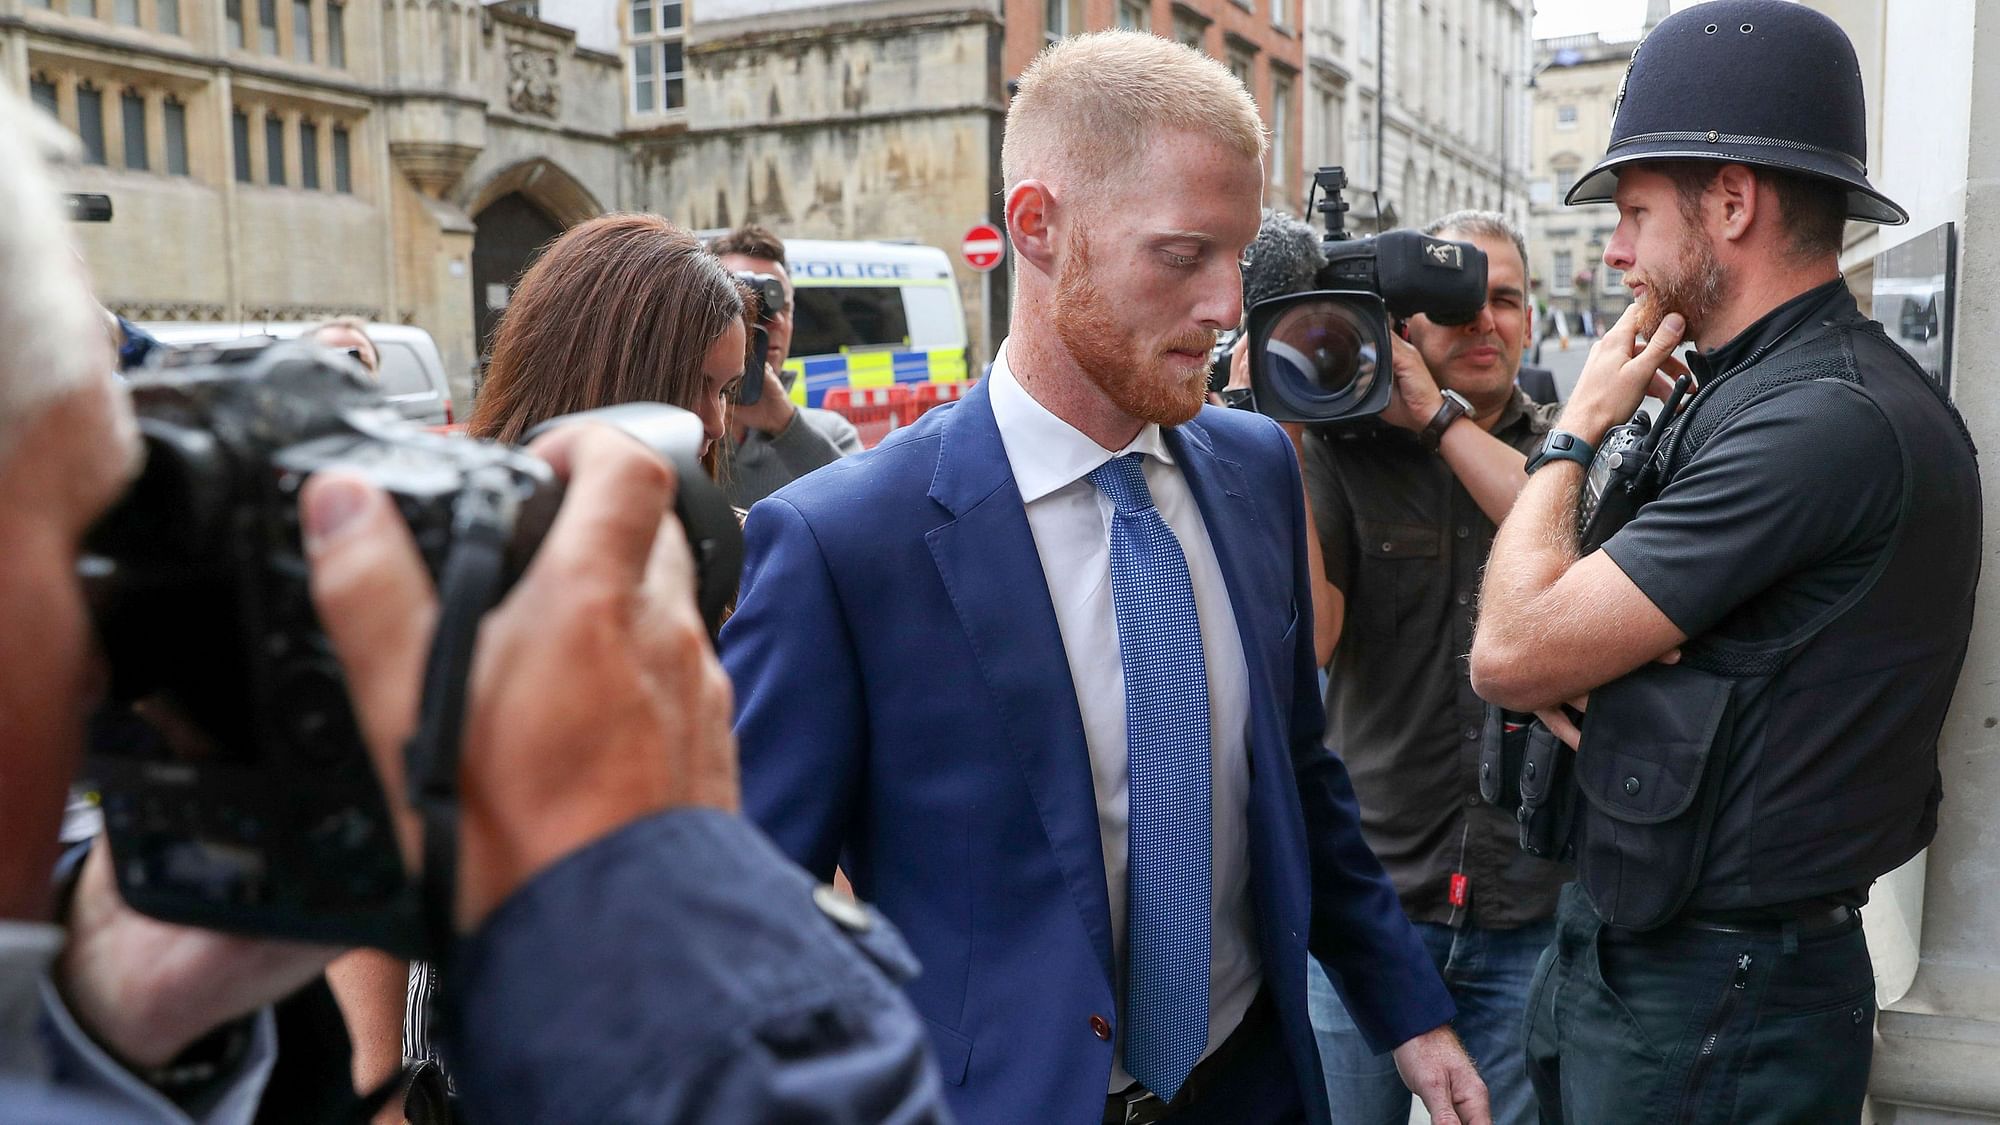 England’s star all-rounder Ben Stokes has penned down an emotionally charged ‘thank you’ message to all the people who “said that my (Stokes’) dad is in their prayers” as his father, Ged, treaded the recovery path from illness.